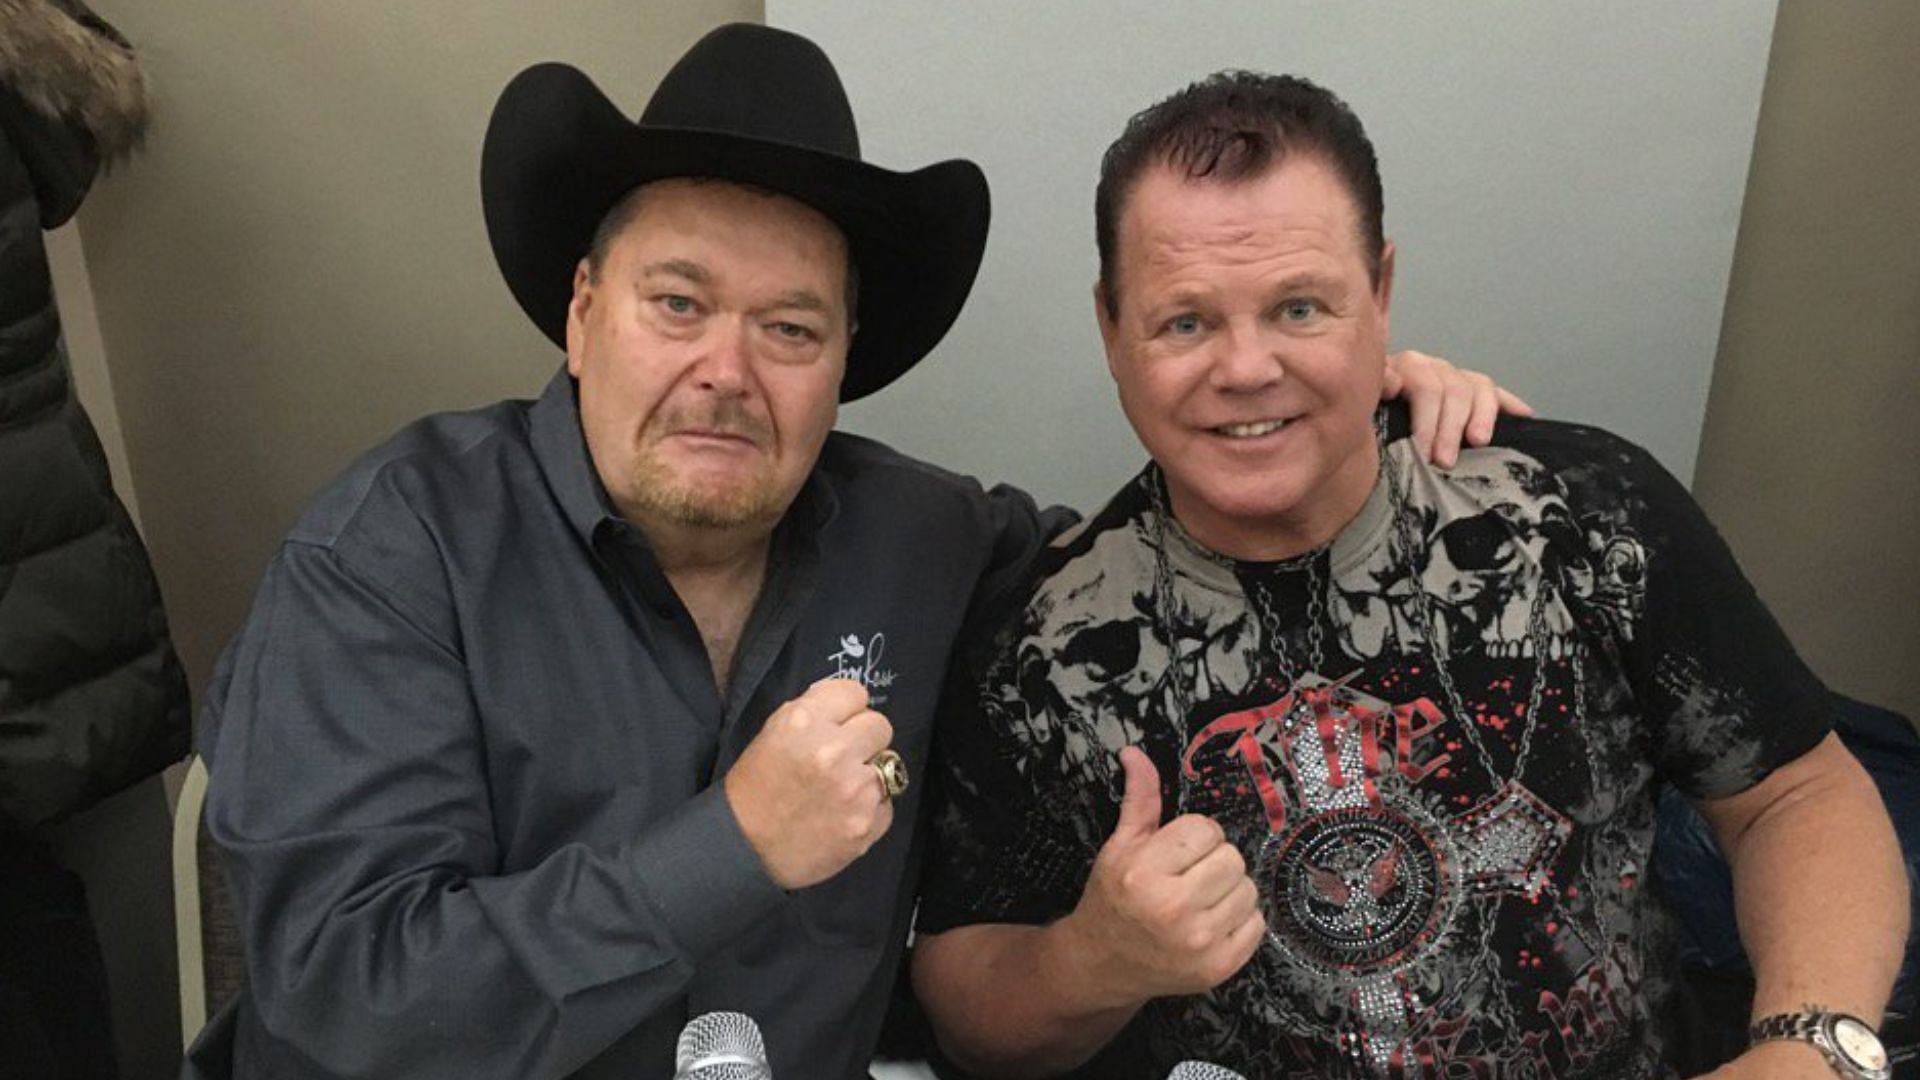 Jim Ross and Jerry Lawler are bonafide WWE legends.